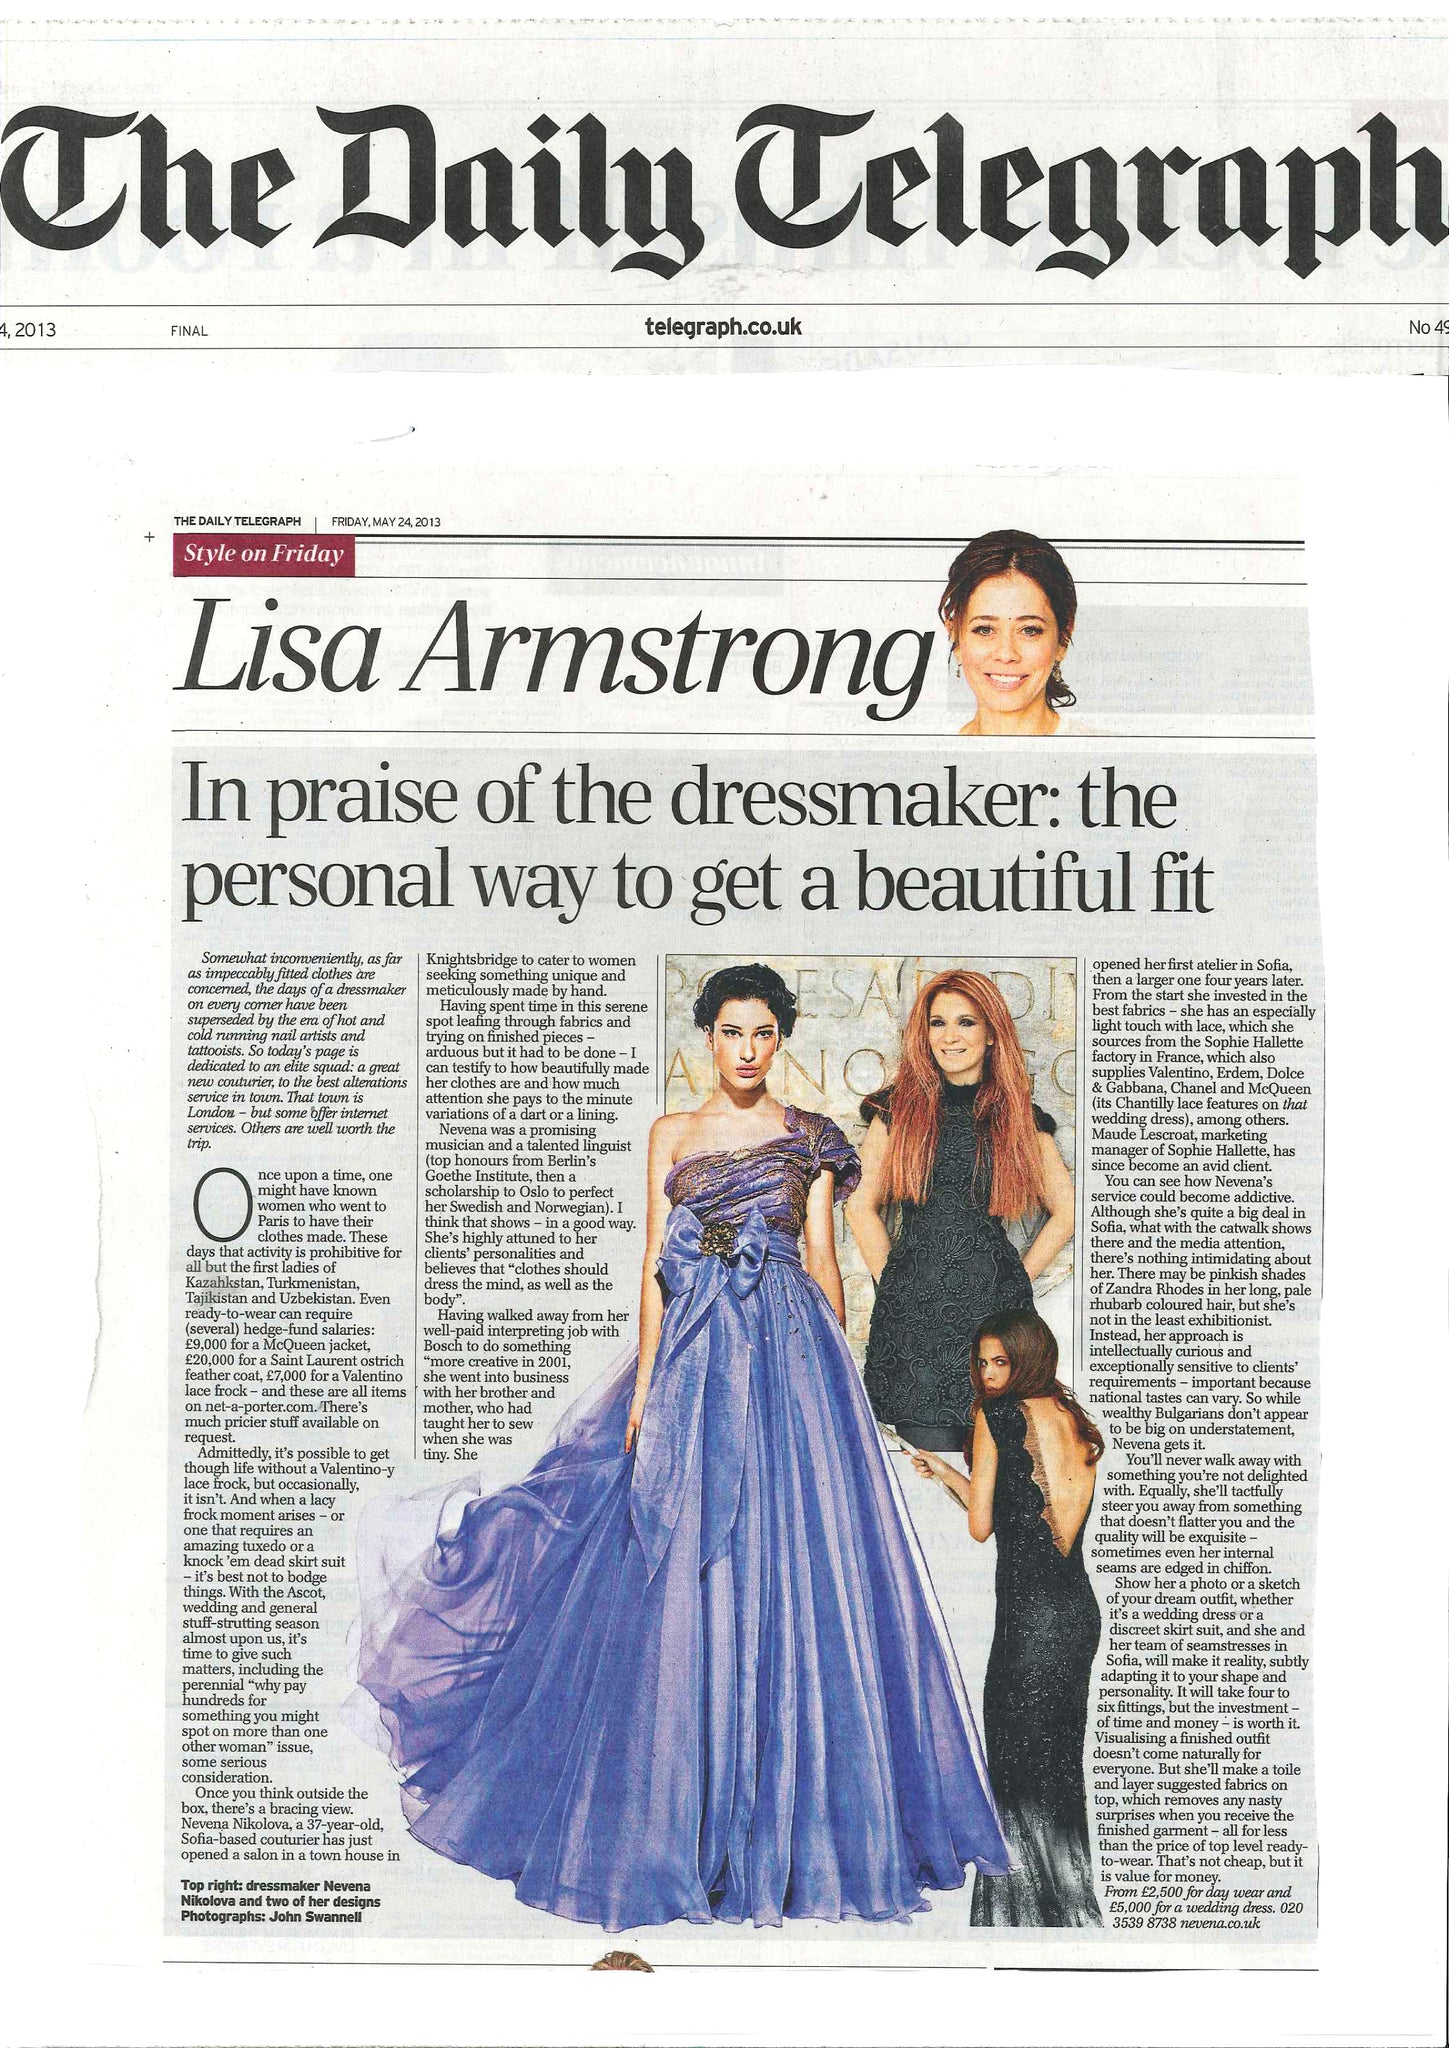 The Daily Telegraph 2013